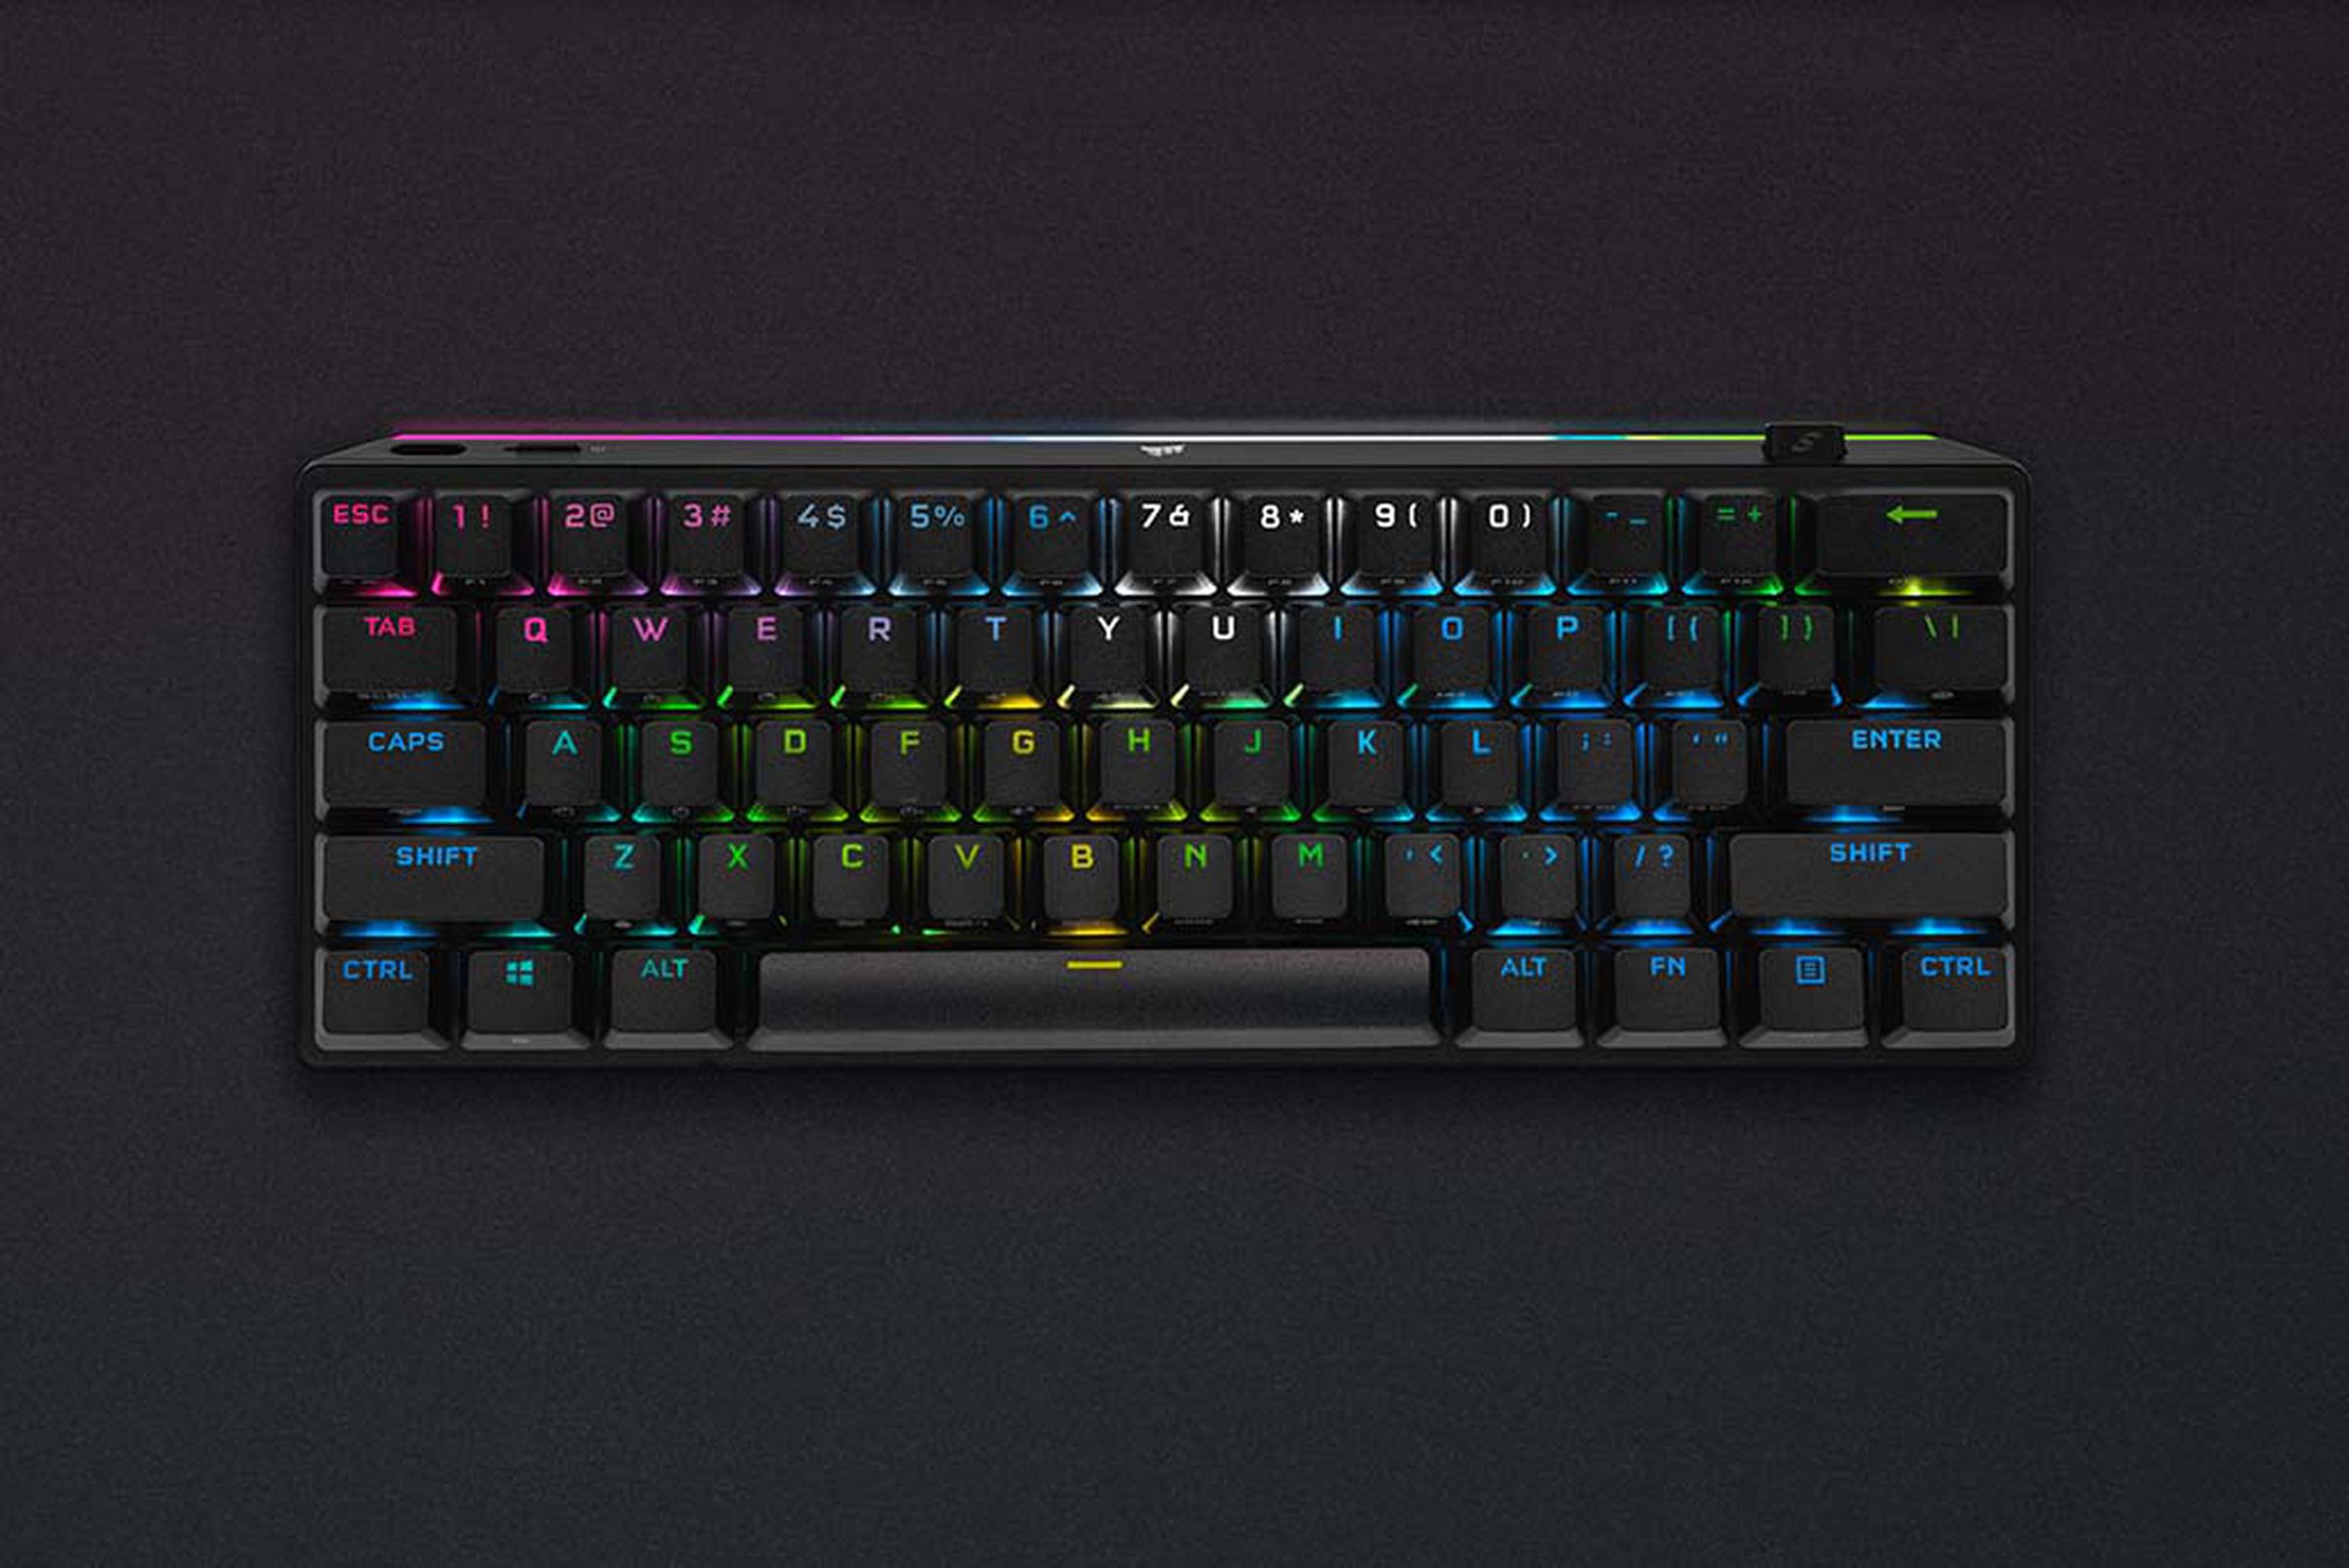 It’s RGB backlit, obviously.